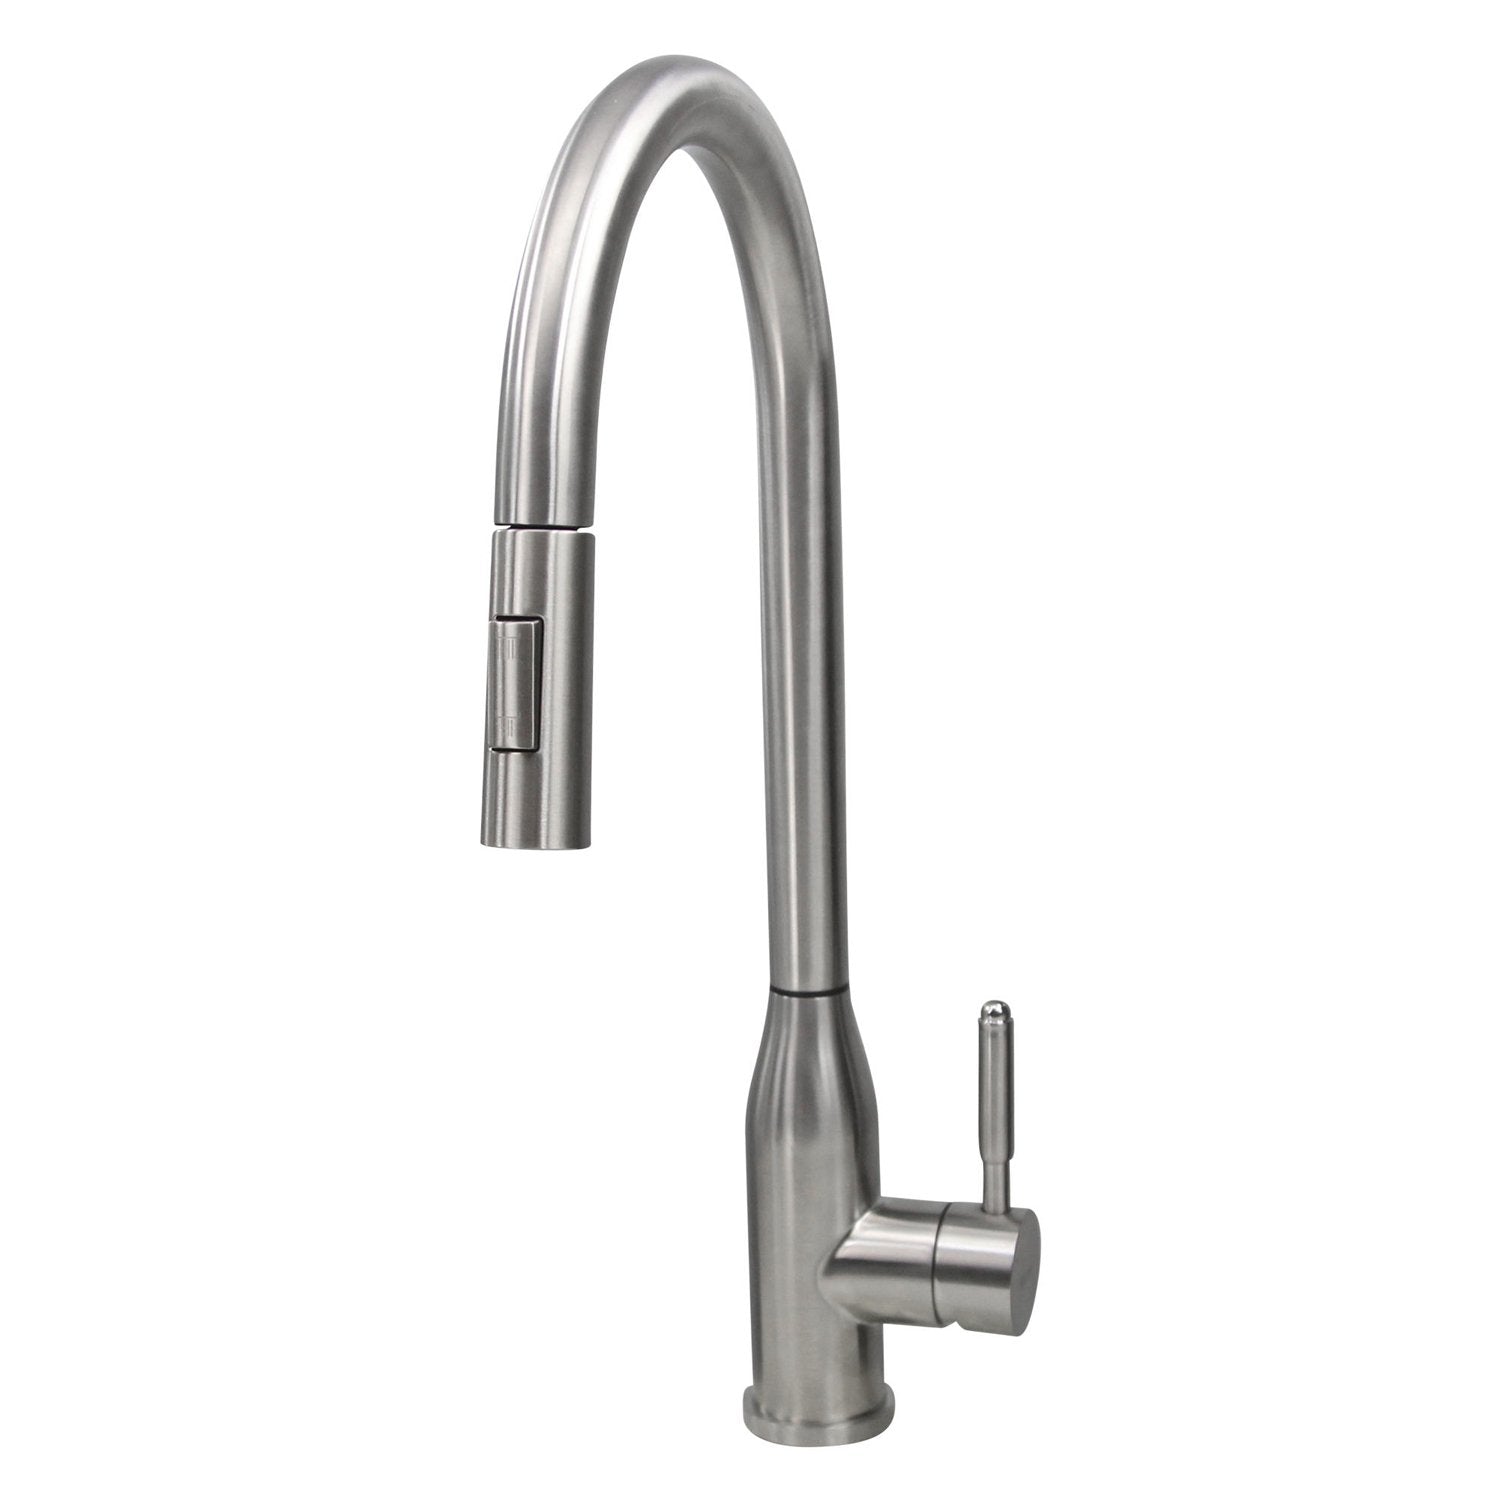 Nantucket Sinks KF-PD18-SS Goose Neck Pull-Down Faucet with Modern Styling